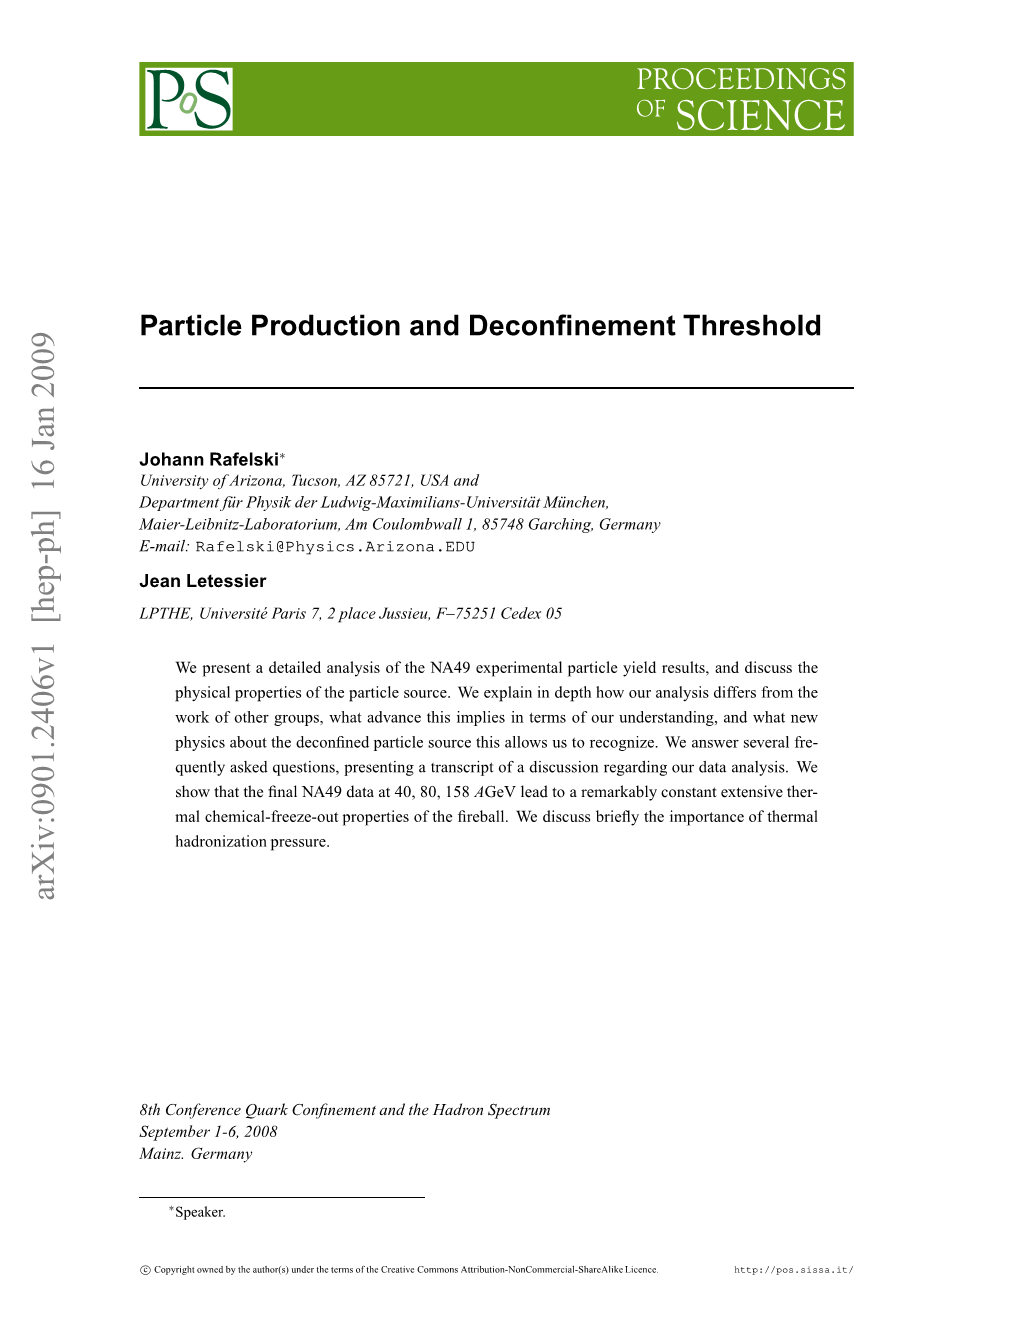 Particle Production and Deconfinement Threshold